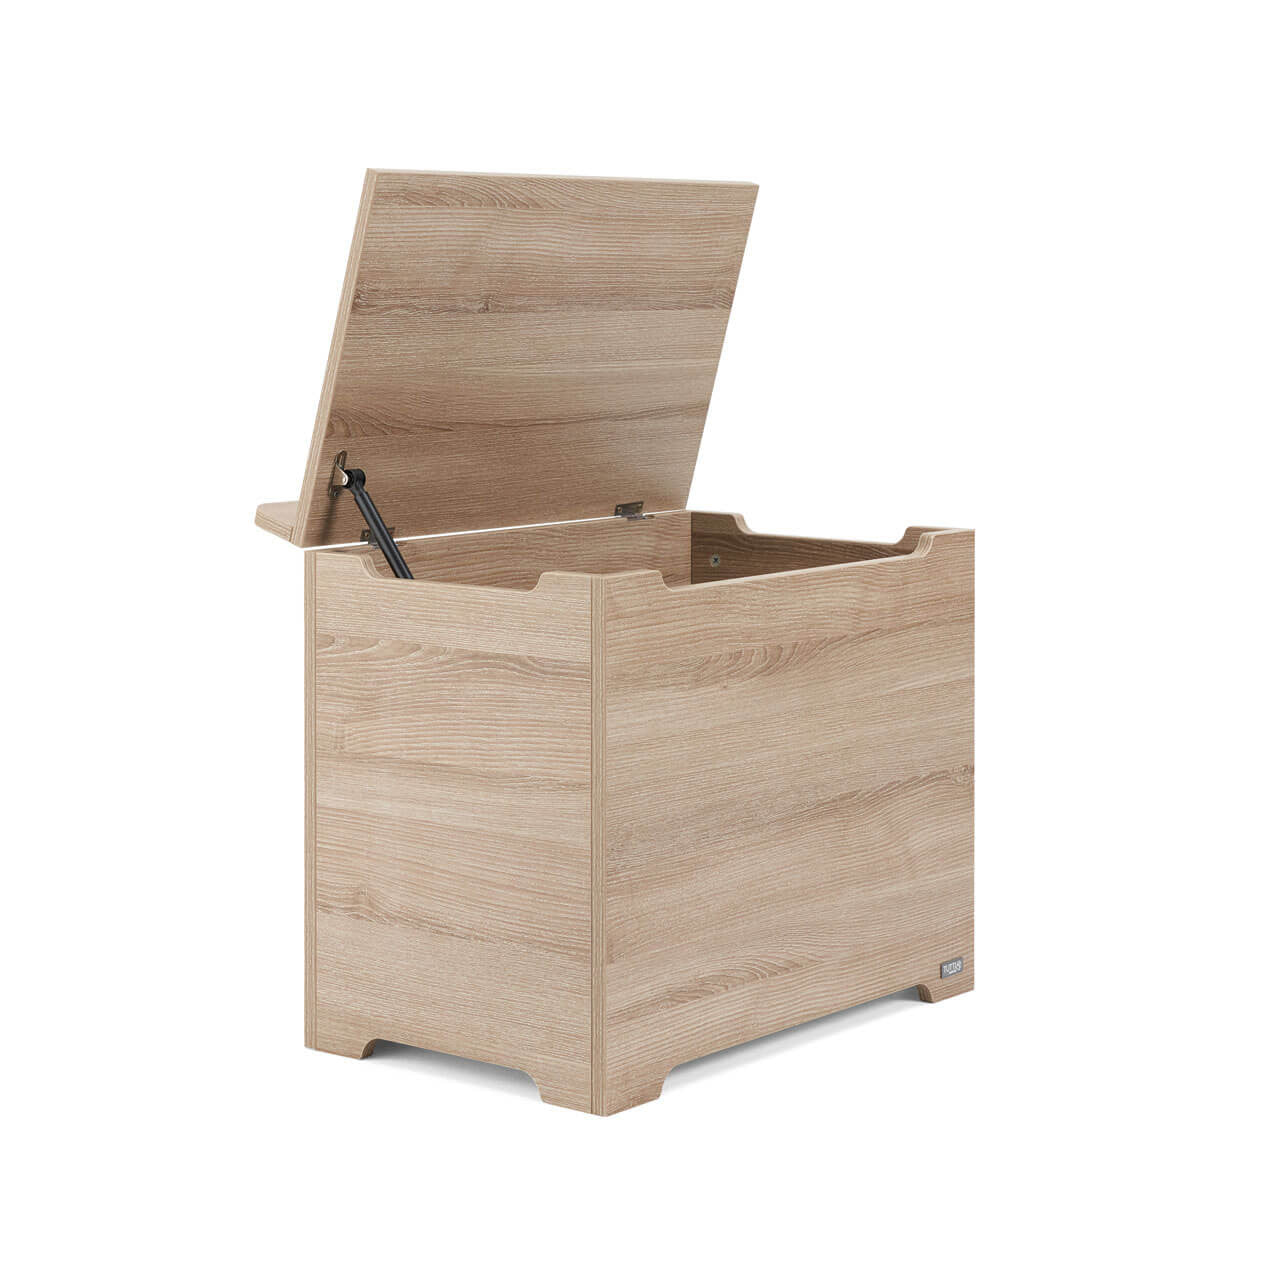 Tutti Bambini Modena Toy Box - Oak - For Your Little One